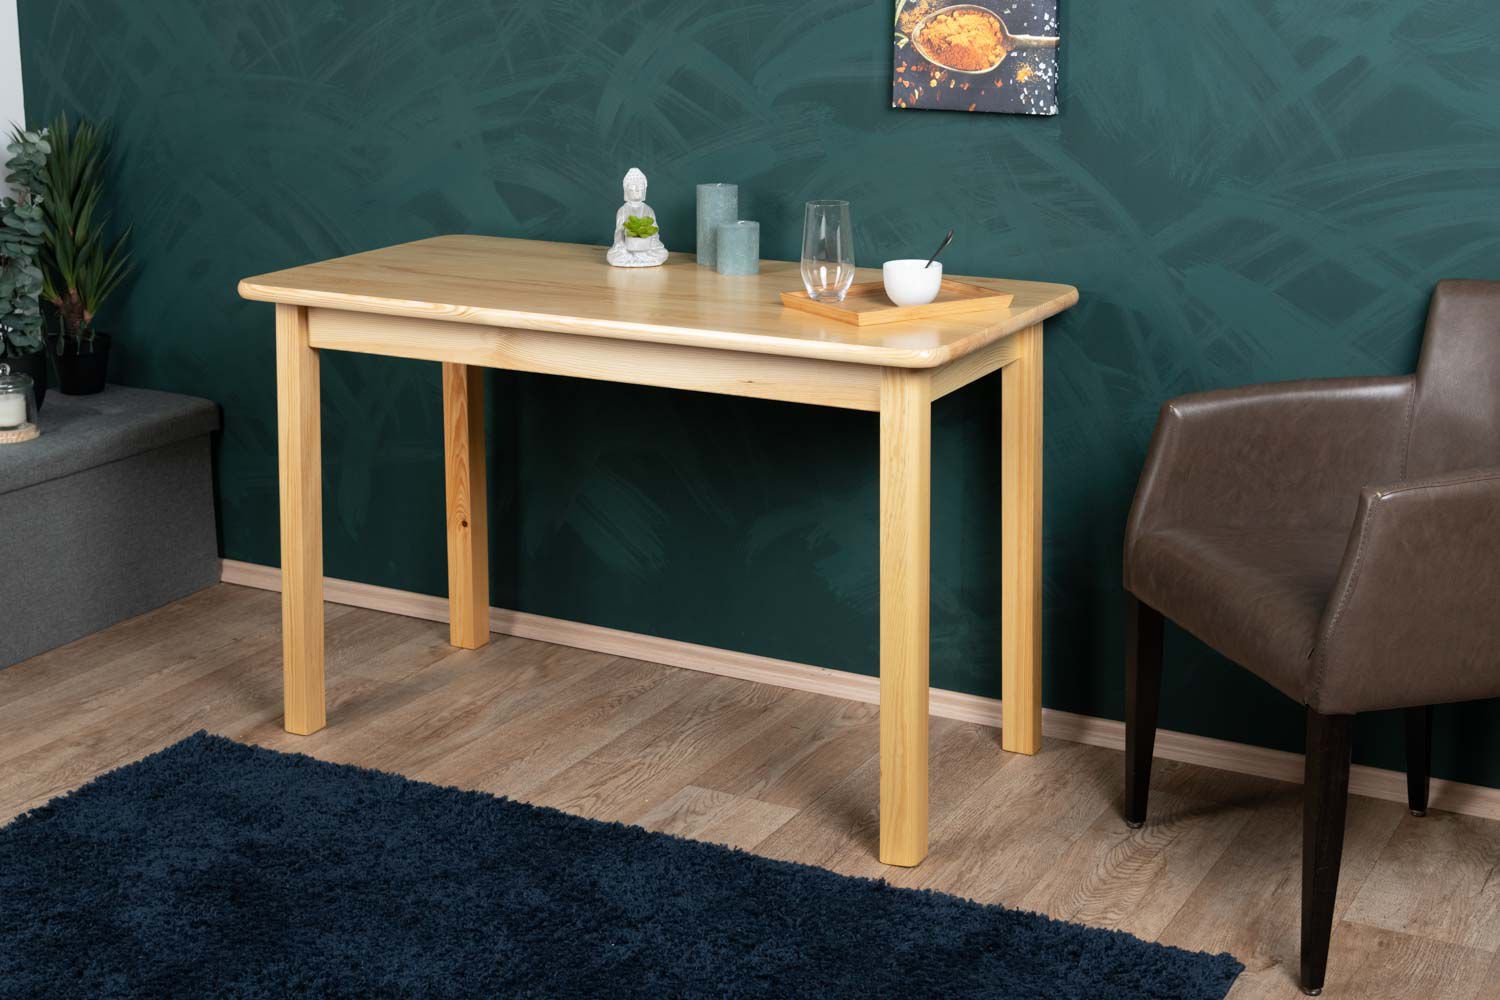 Table solid pine solid wood natural 001 (angular) - Dimensions 120 x 60 cm (W x D)